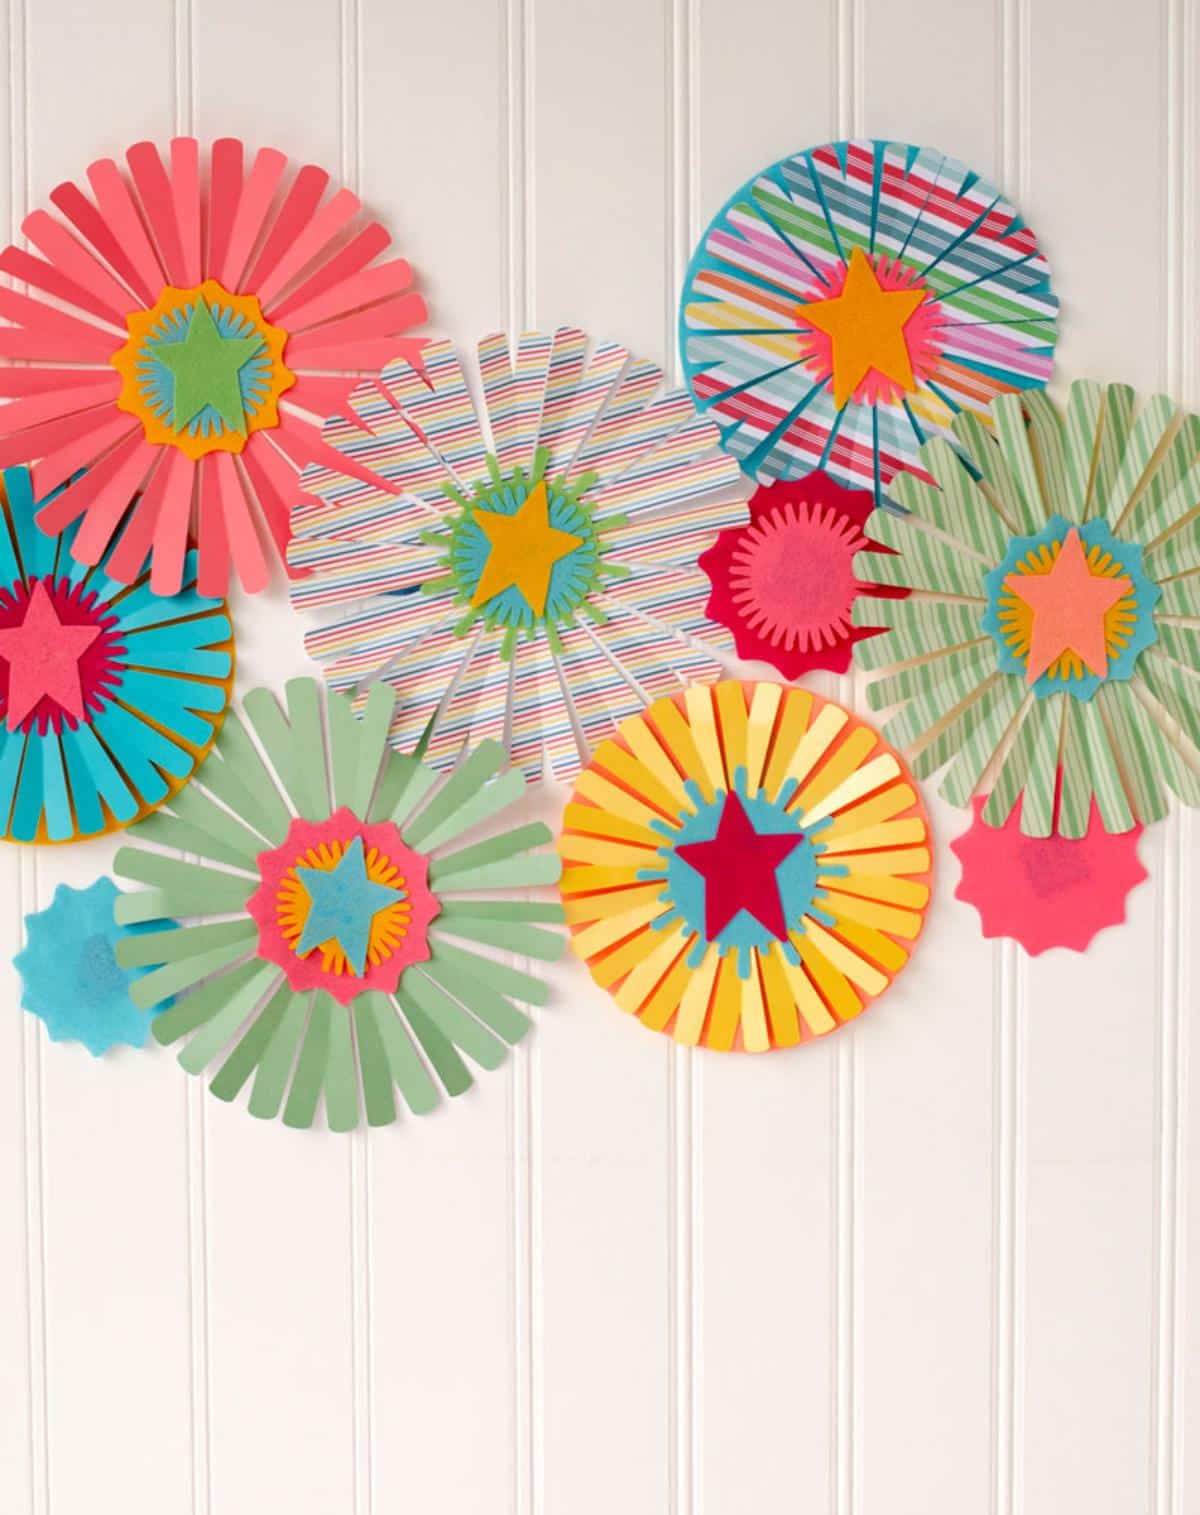 Make Your Own Party Paper Fans with Cricut